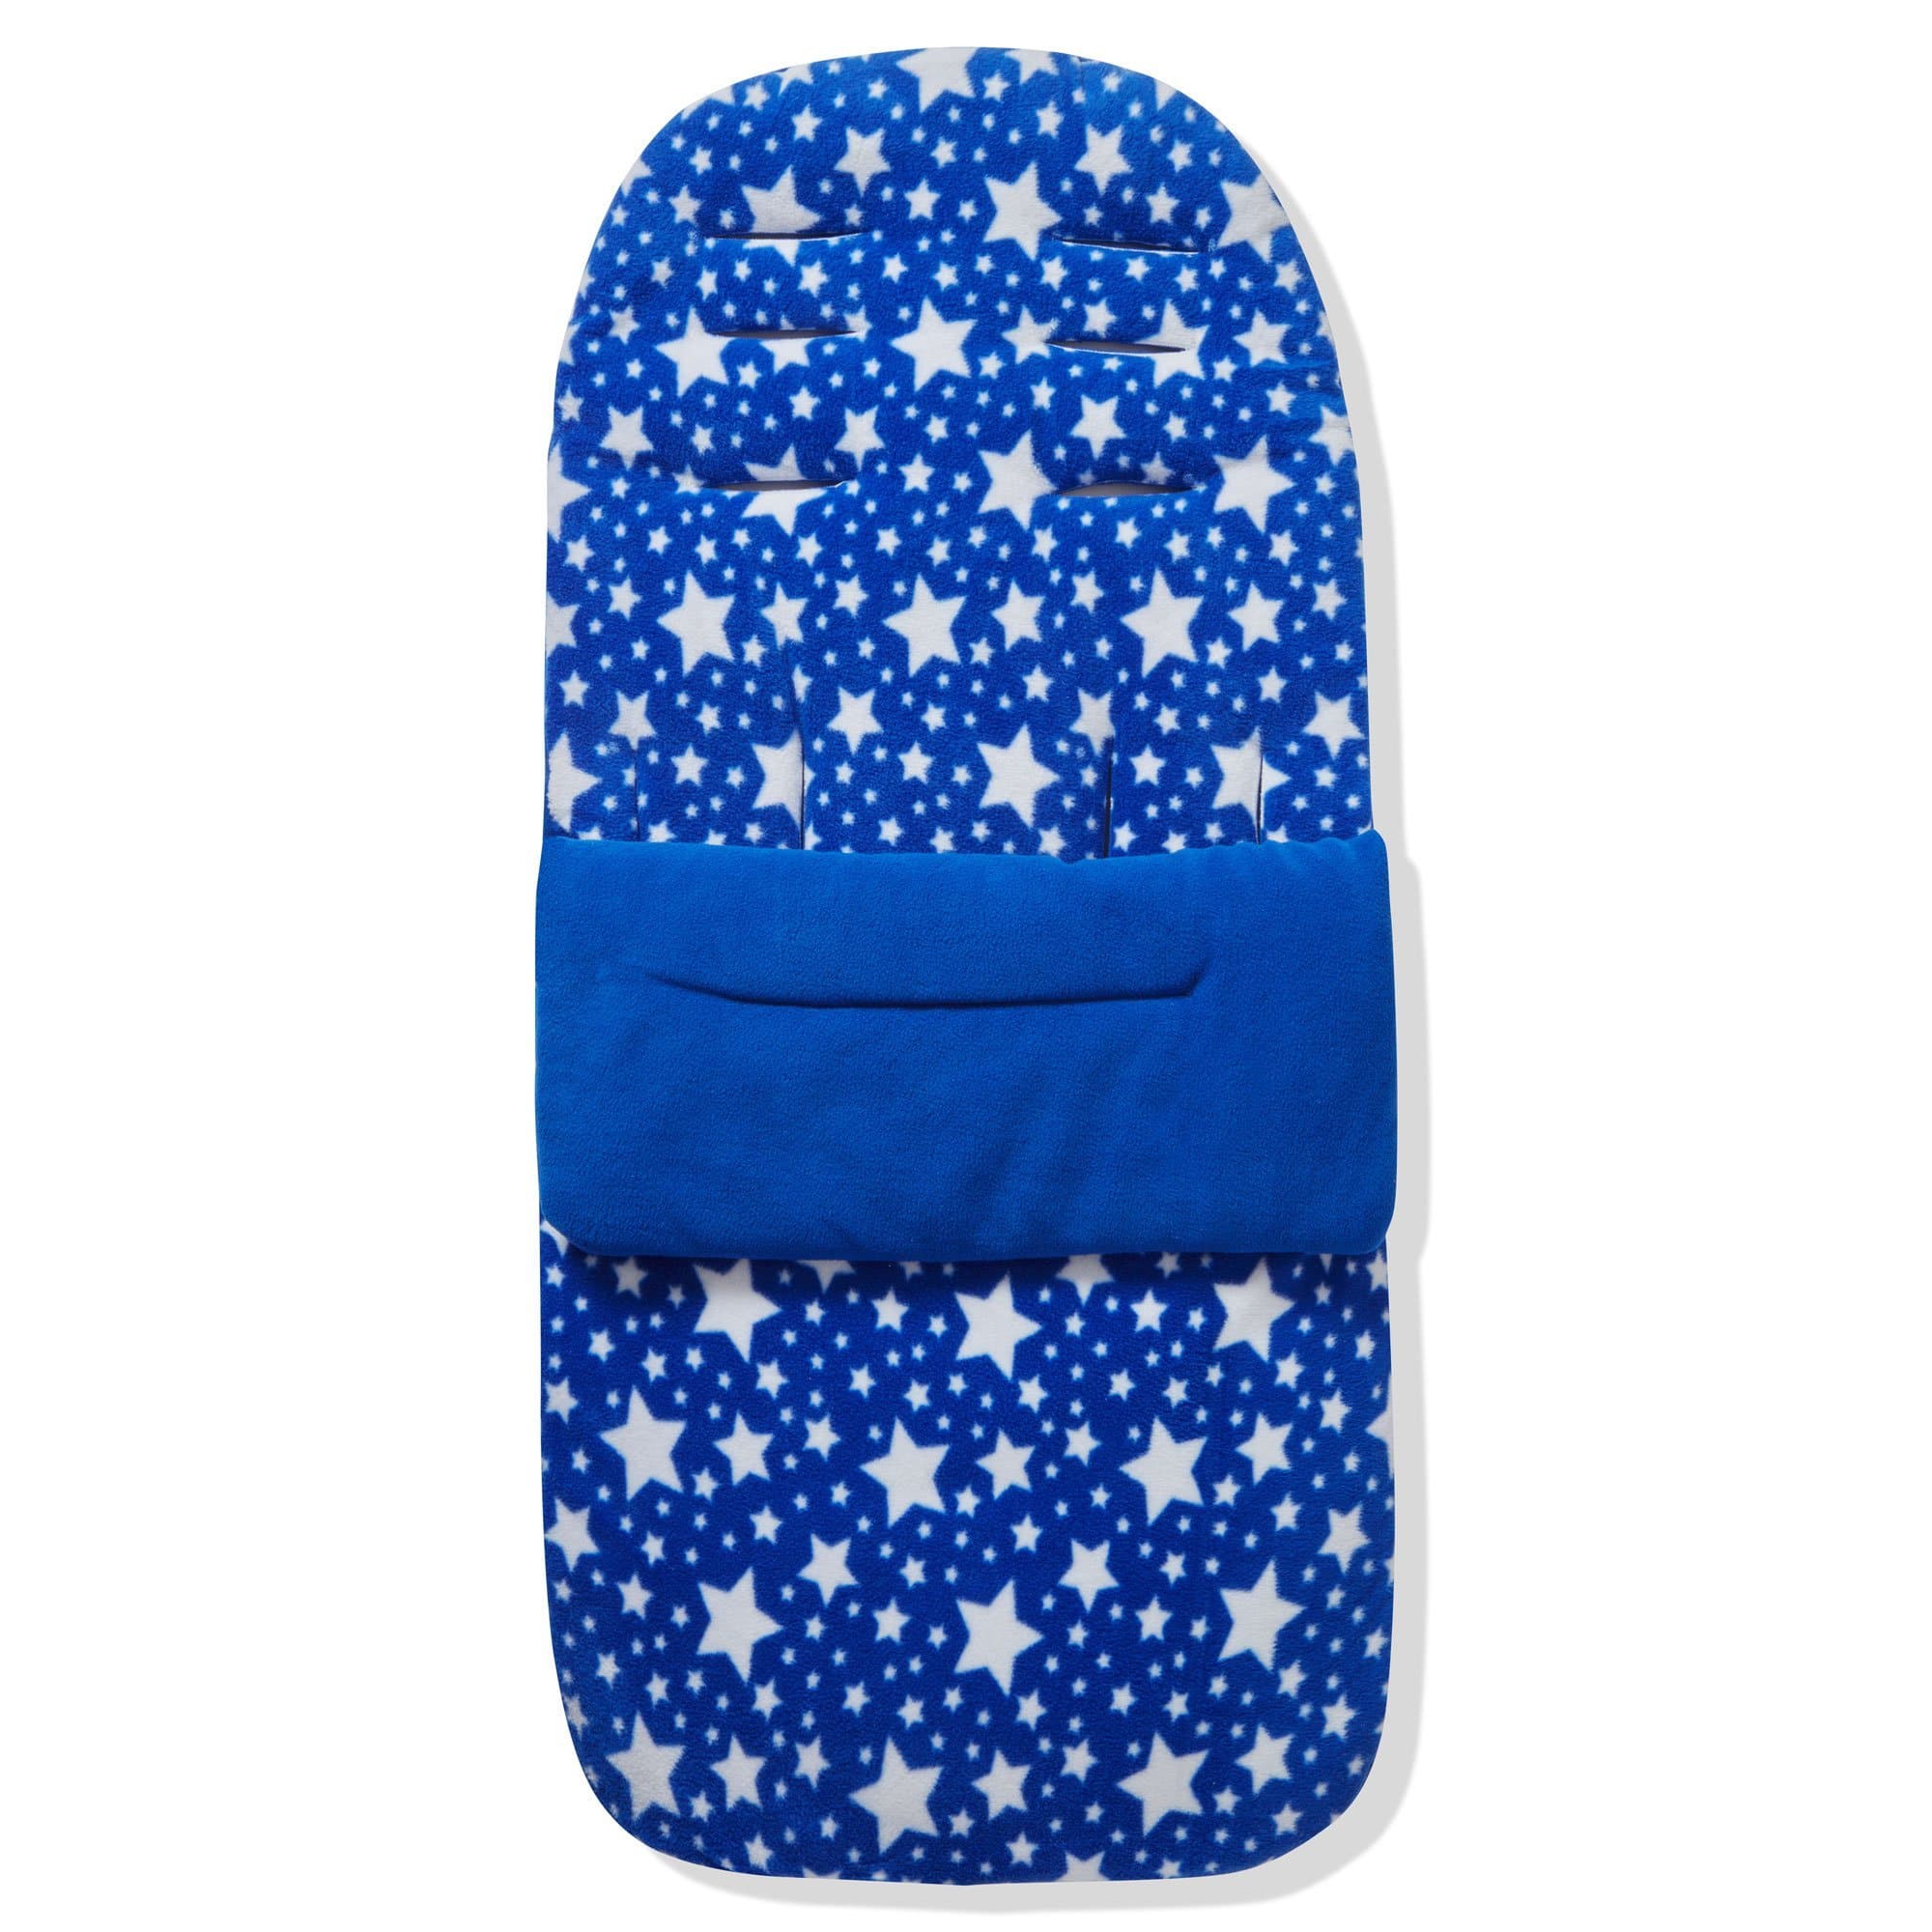 Fleece Footmuff / Cosy Toes Compatible With BabyCare - For Your Little One